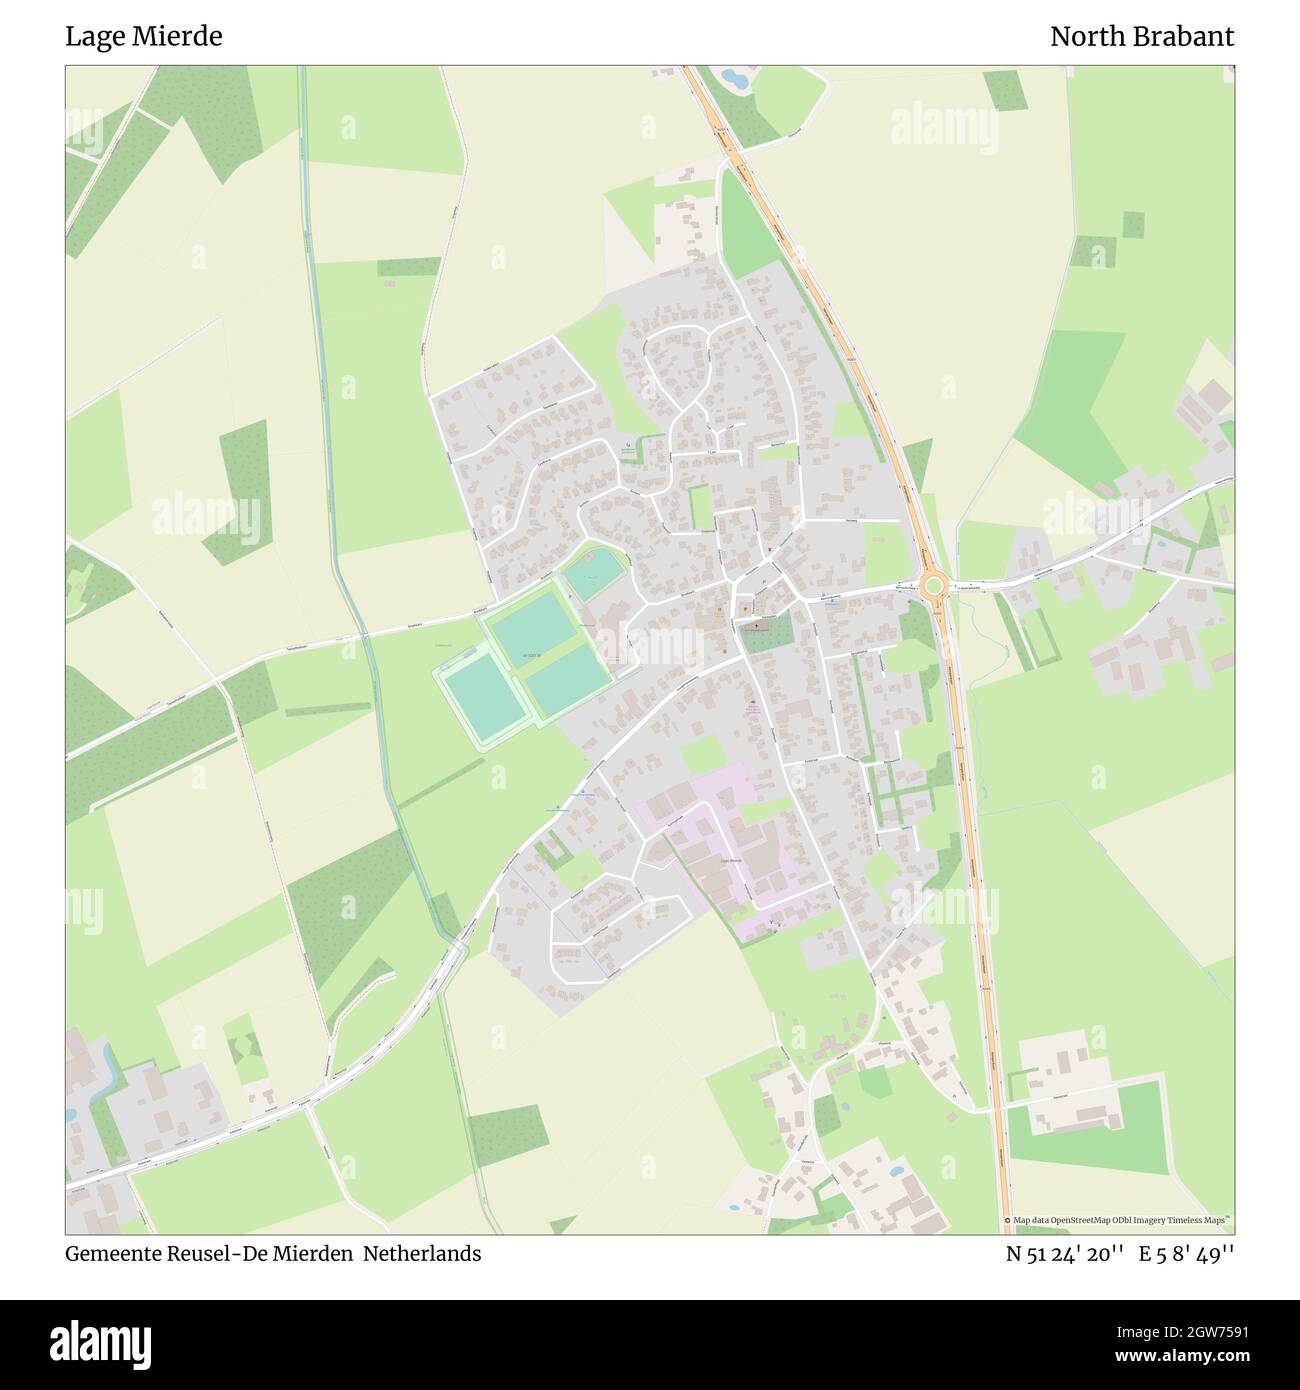 Lage Mierde, Gemeente Reusel-De Mierden, Netherlands, North Brabant, N 51 24' 20'', E 5 8' 49'', map, Timeless Map published in 2021. Travelers, explorers and adventurers like Florence Nightingale, David Livingstone, Ernest Shackleton, Lewis and Clark and Sherlock Holmes relied on maps to plan travels to the world's most remote corners, Timeless Maps is mapping most locations on the globe, showing the achievement of great dreams Stock Photo